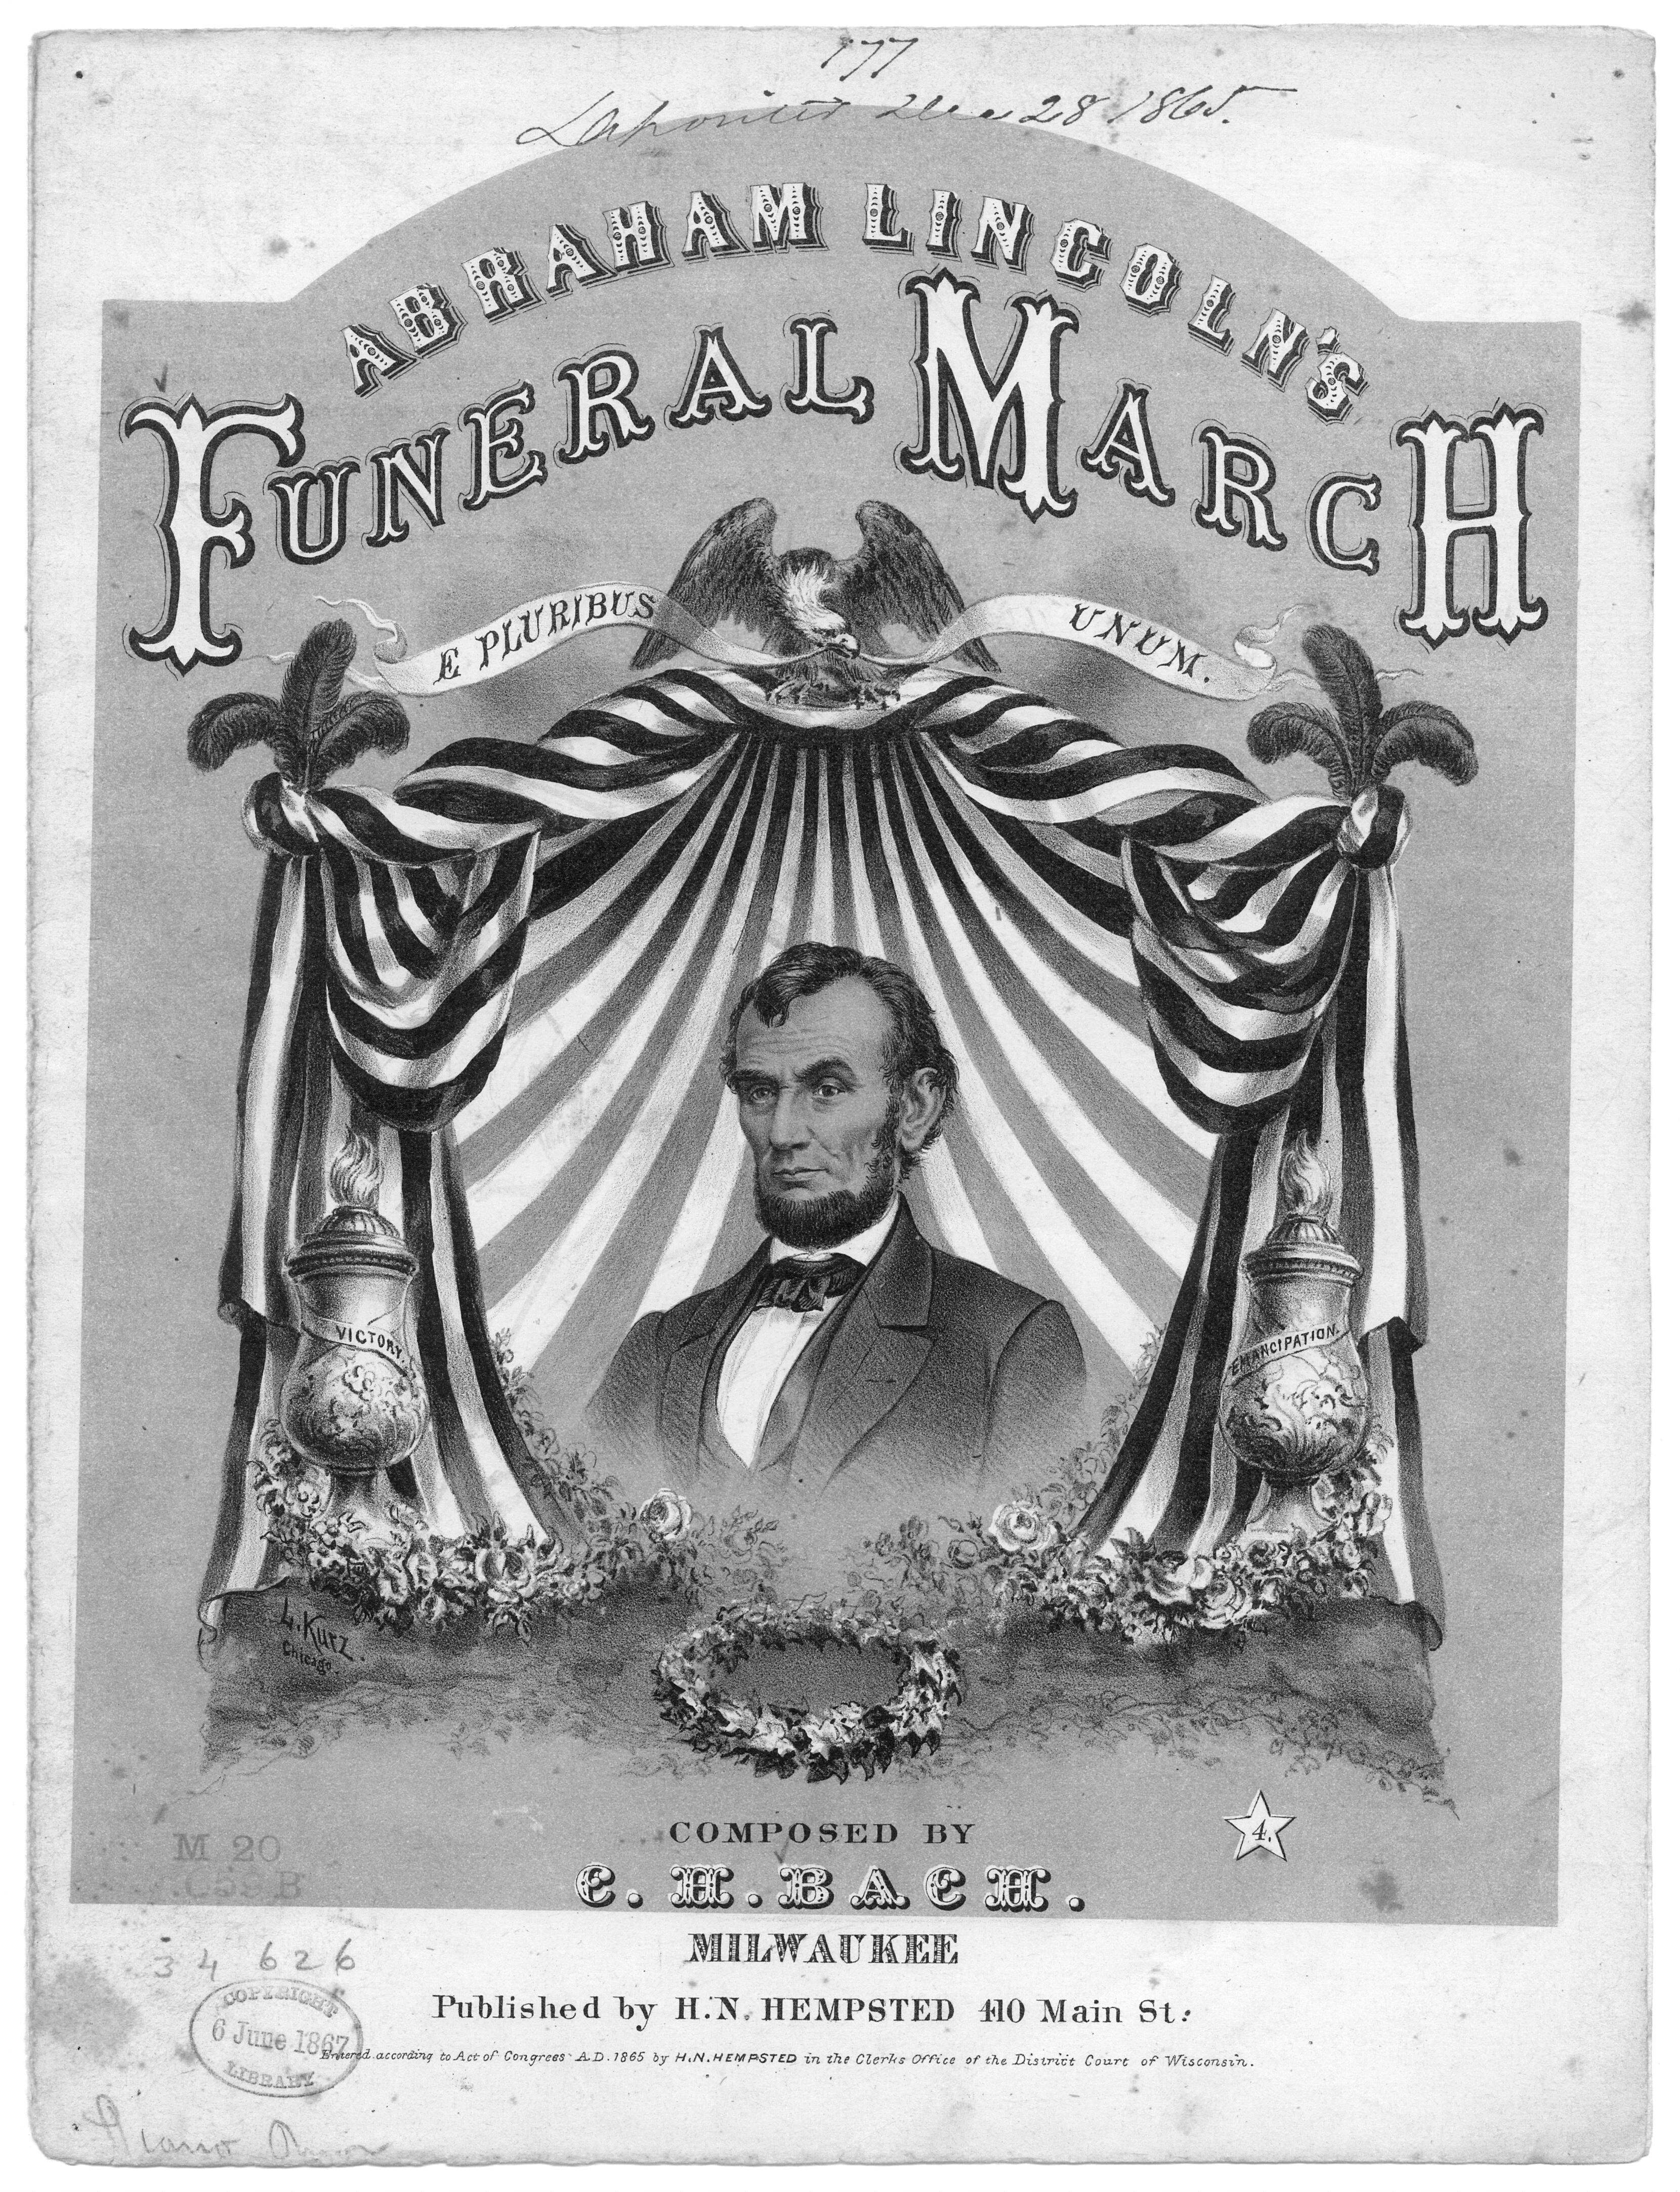 Abraham Lincoln's funeral march